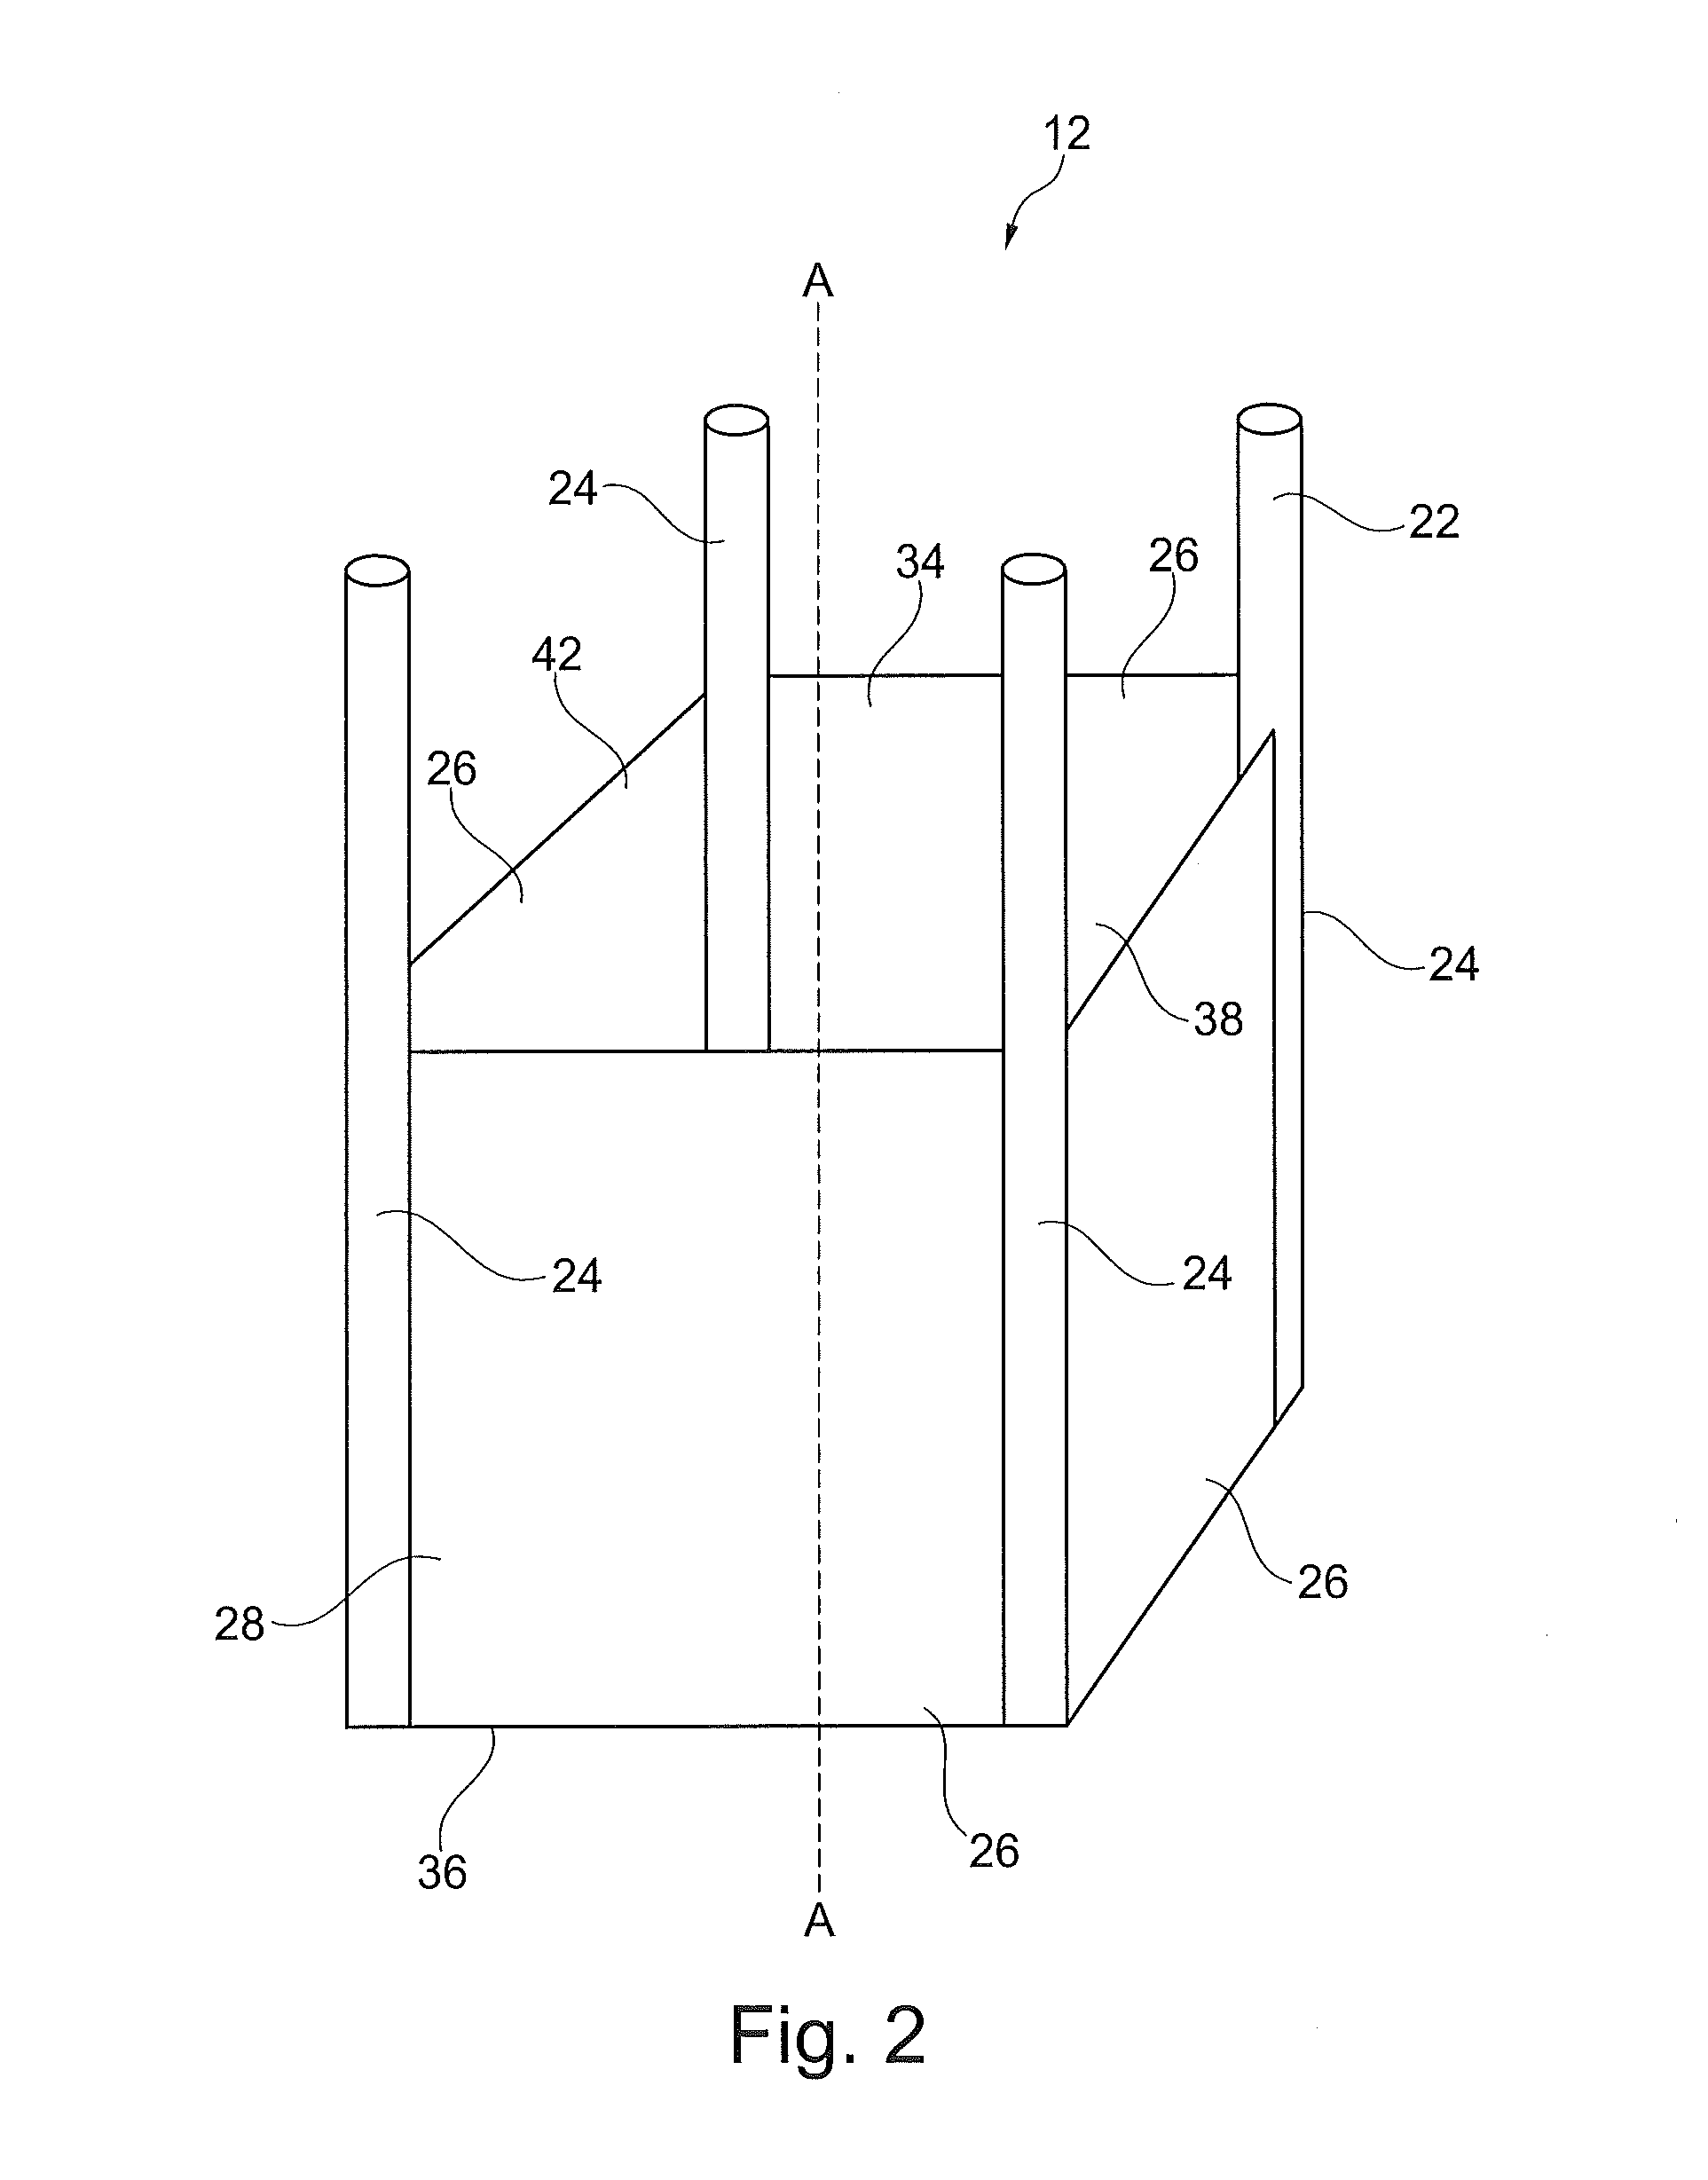 Thermostatic flow control device and method of use